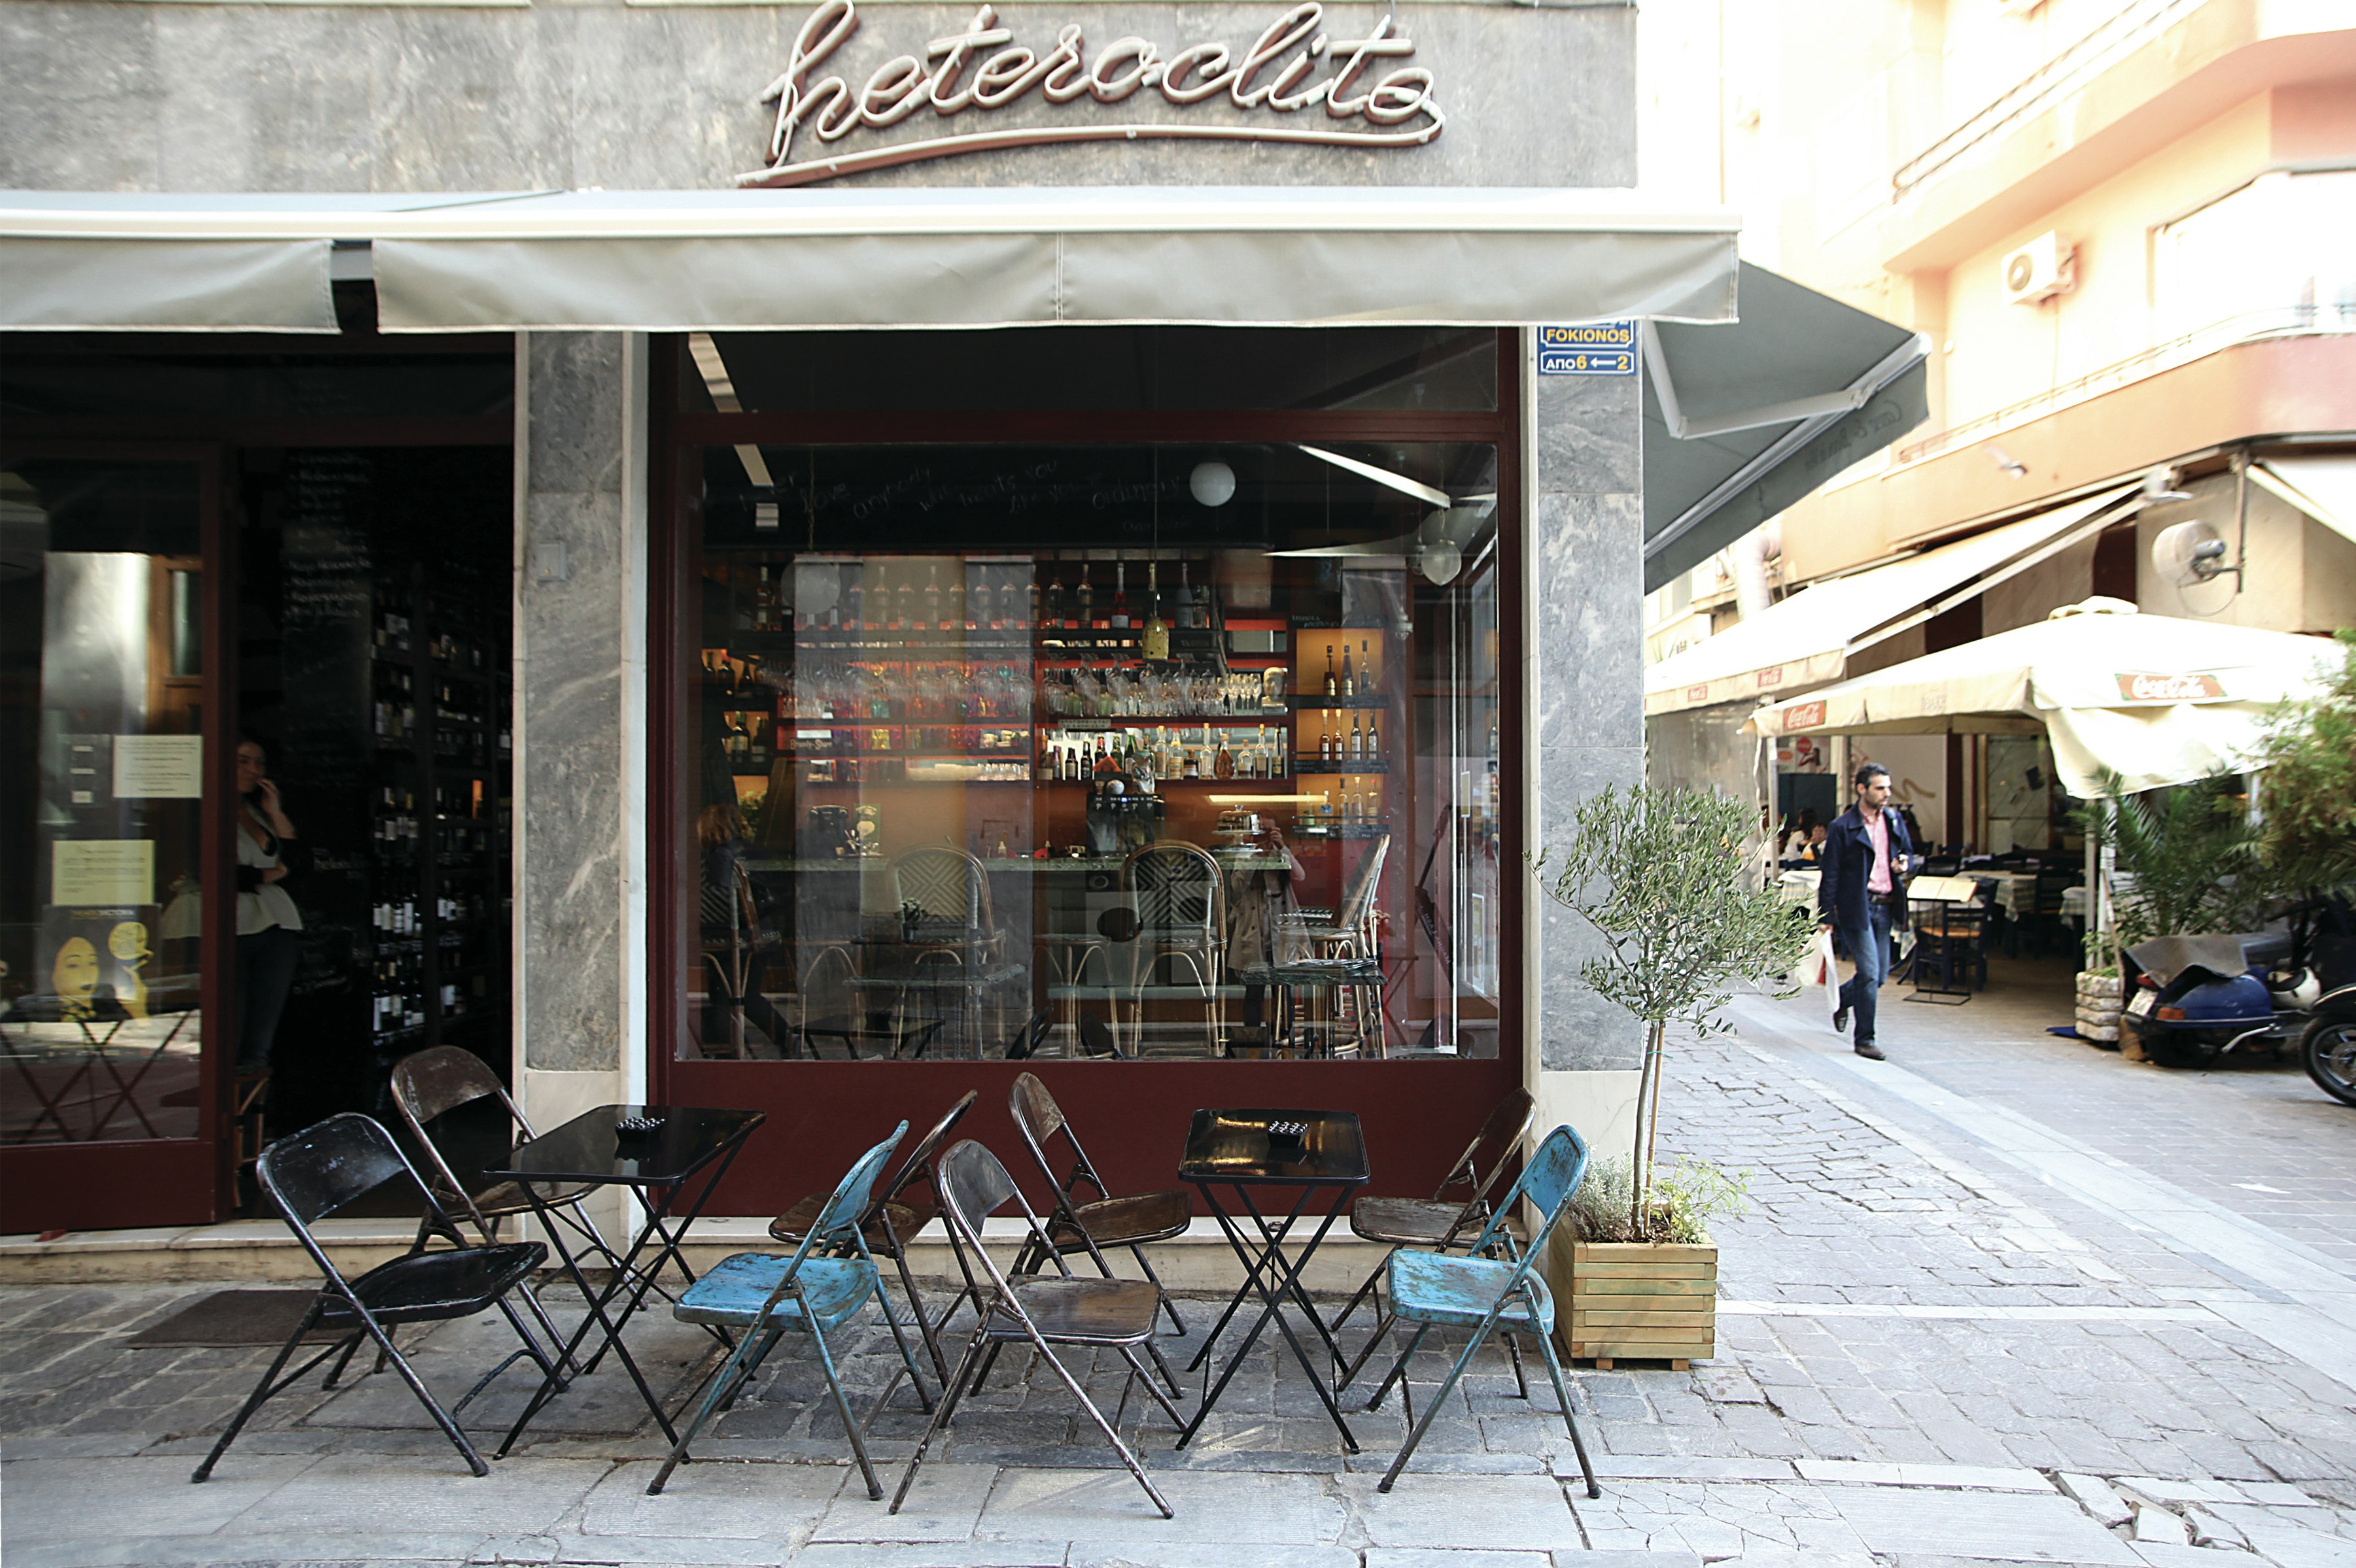 The silver exterior of the Hertoclito restaurnt in the Syntagma and Plaka neighborhood has blue and black cafe chairs out front and a small tree growing in a wooden planter box. Through the window you can see beautifully lit bottles behind the bar in dark, inviting tones. Outside, an Athenian man in jeans and a black jacket walks down the cobbled street